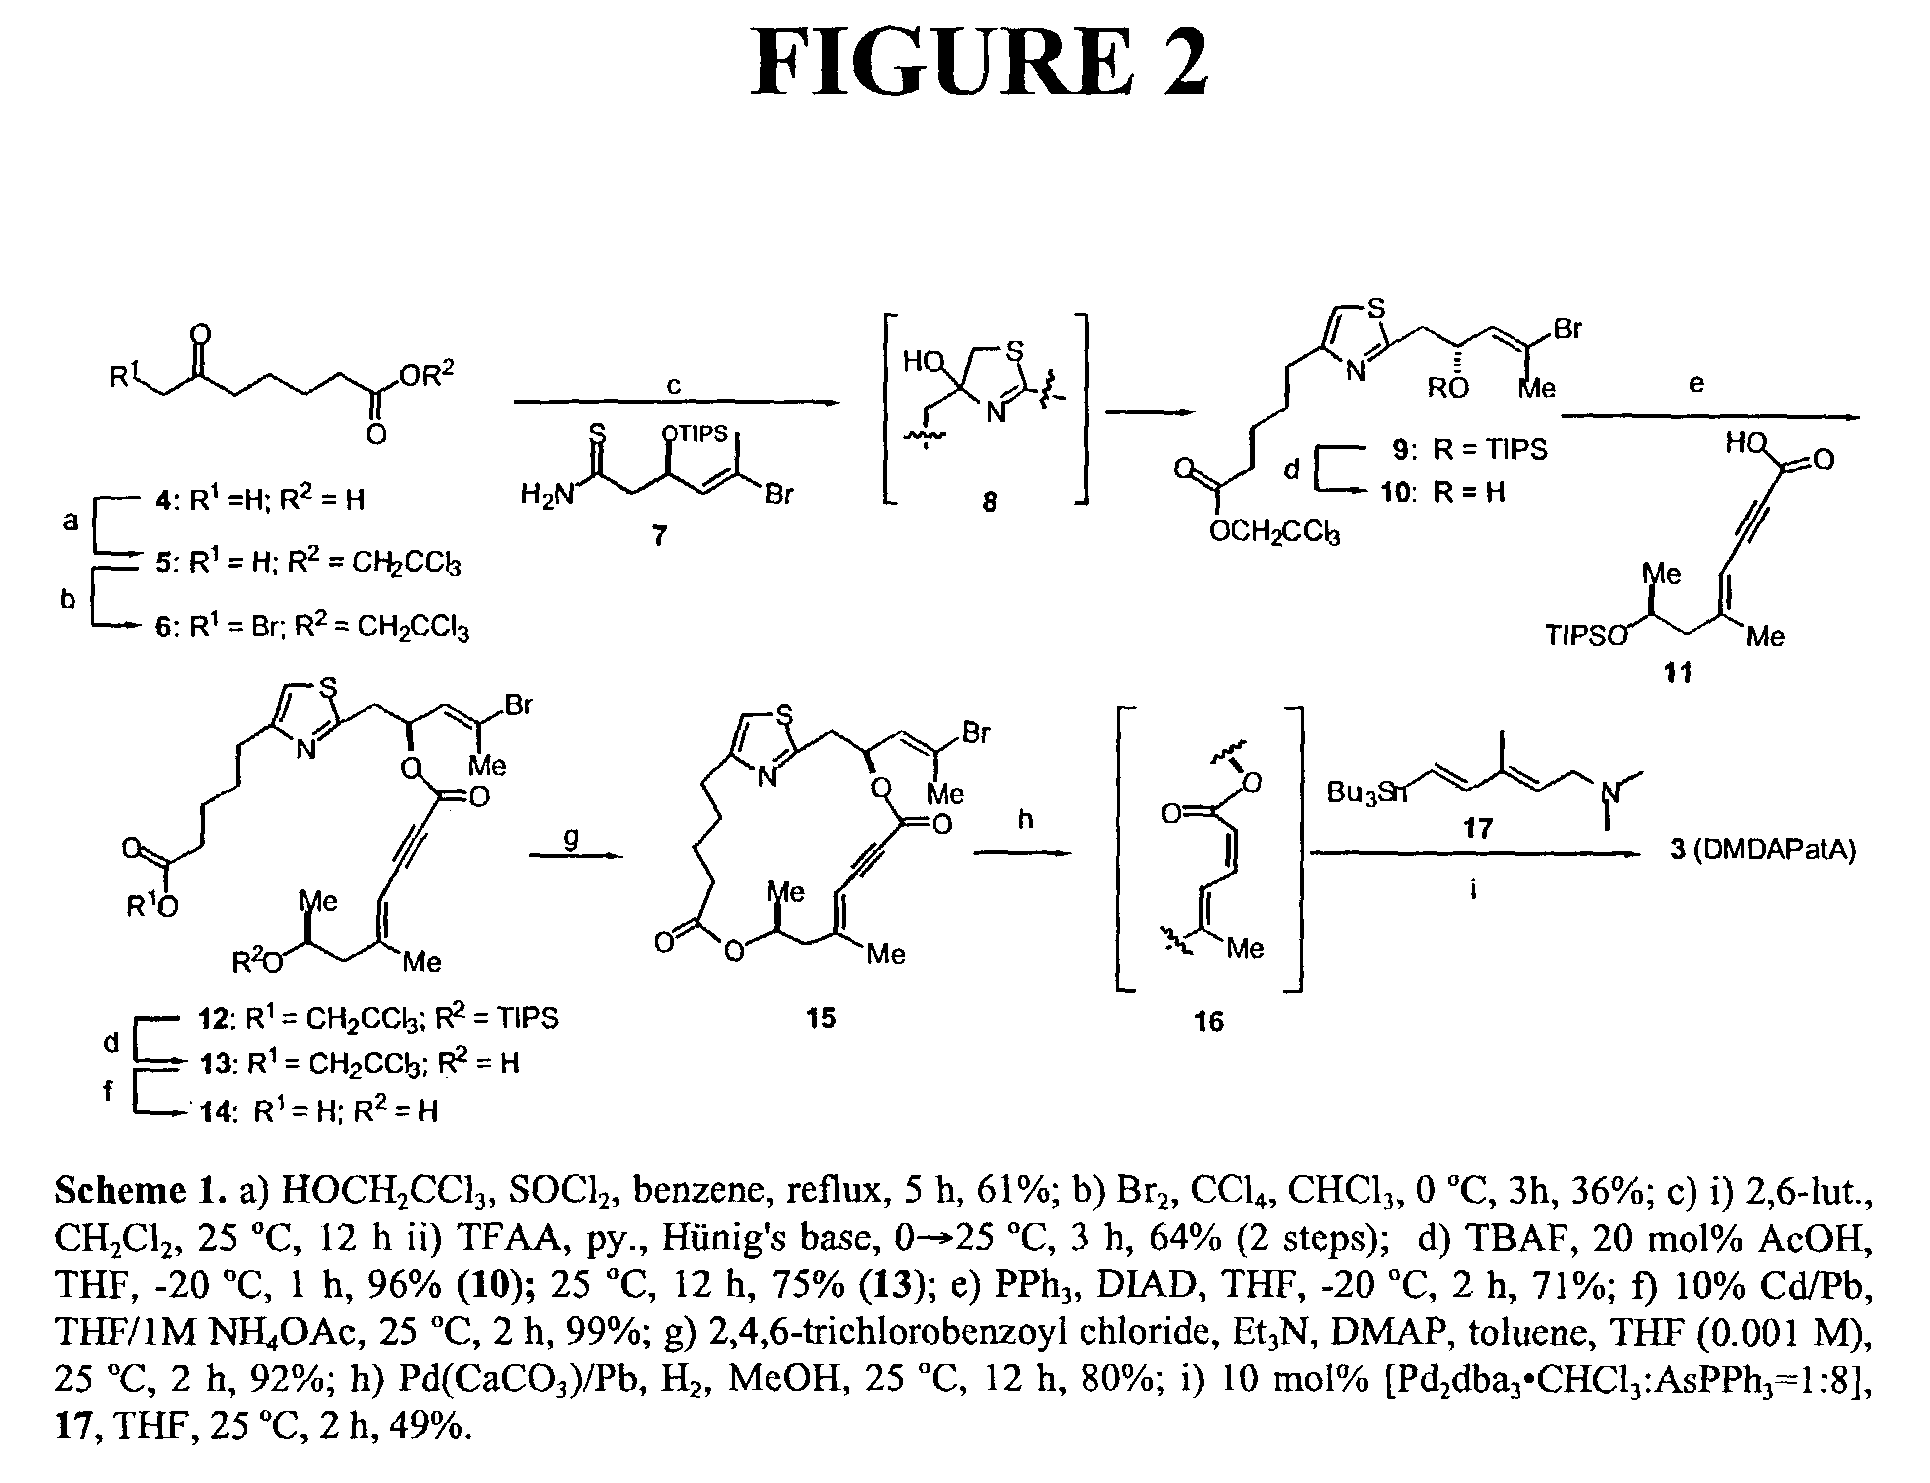 Potent, simplified derivatives of pateamine A